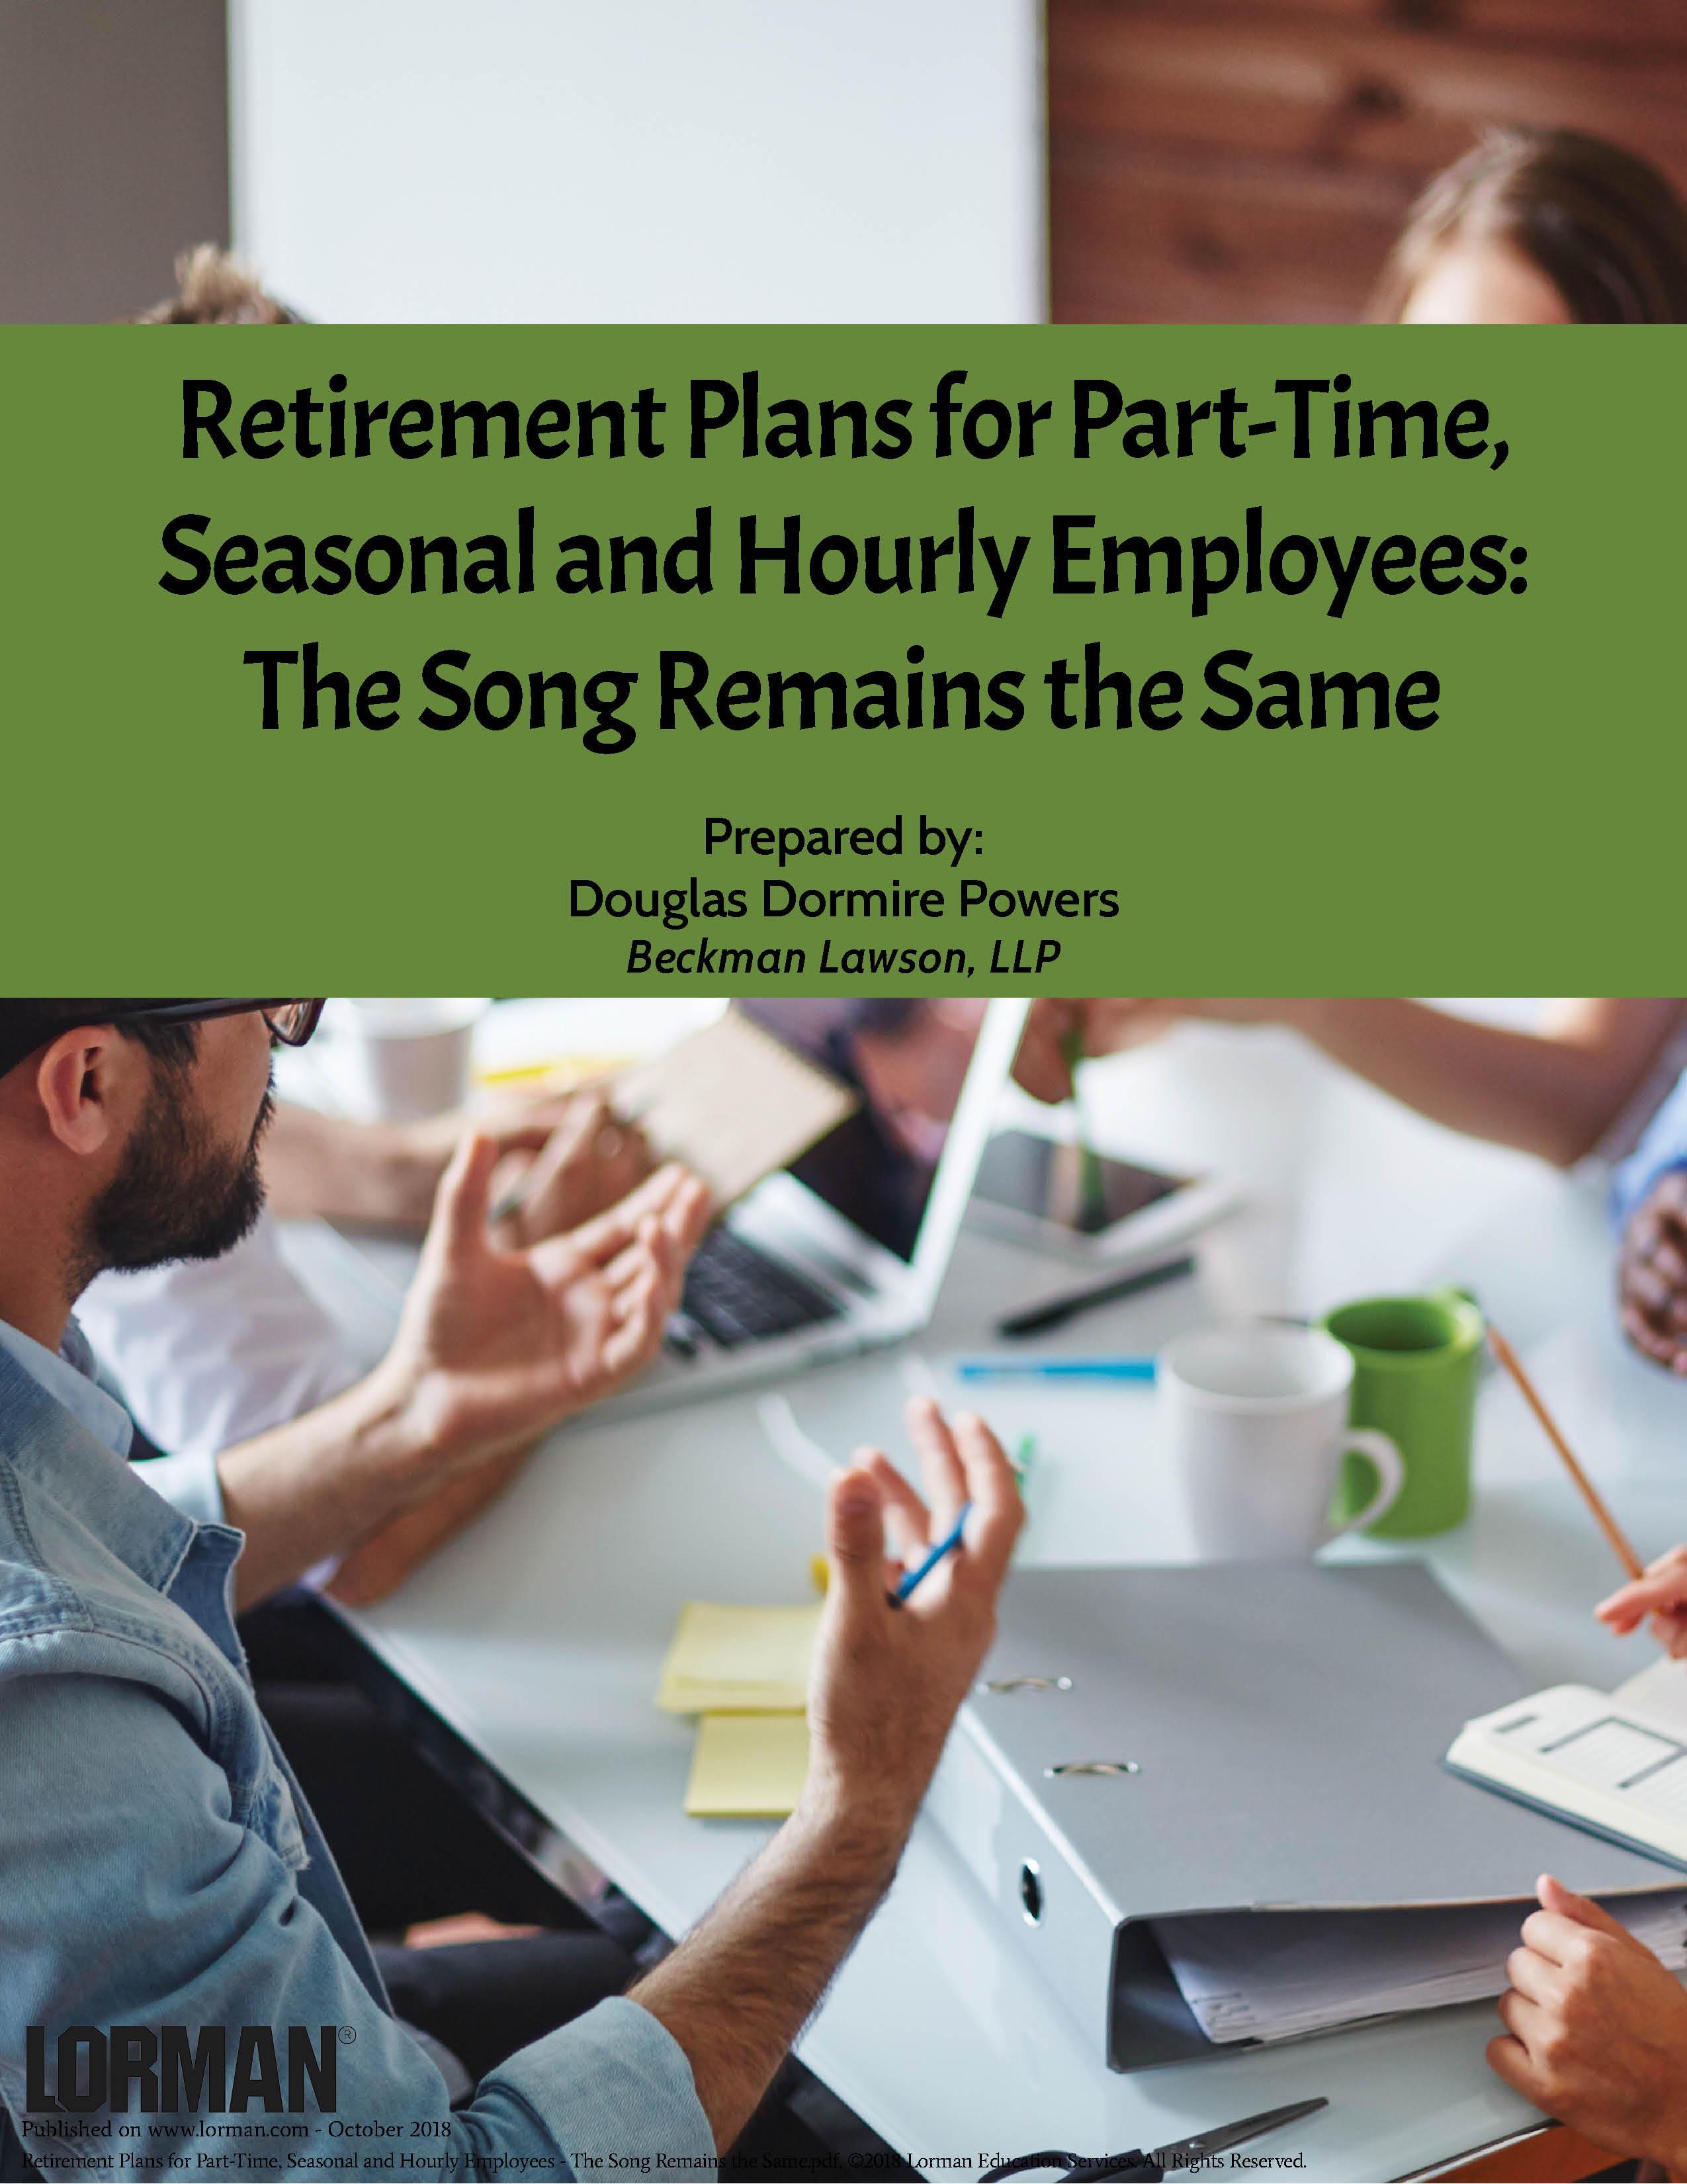 Retirement Plans for Part-Time, Seasonal and Hourly Employees - The Song Remains the Same